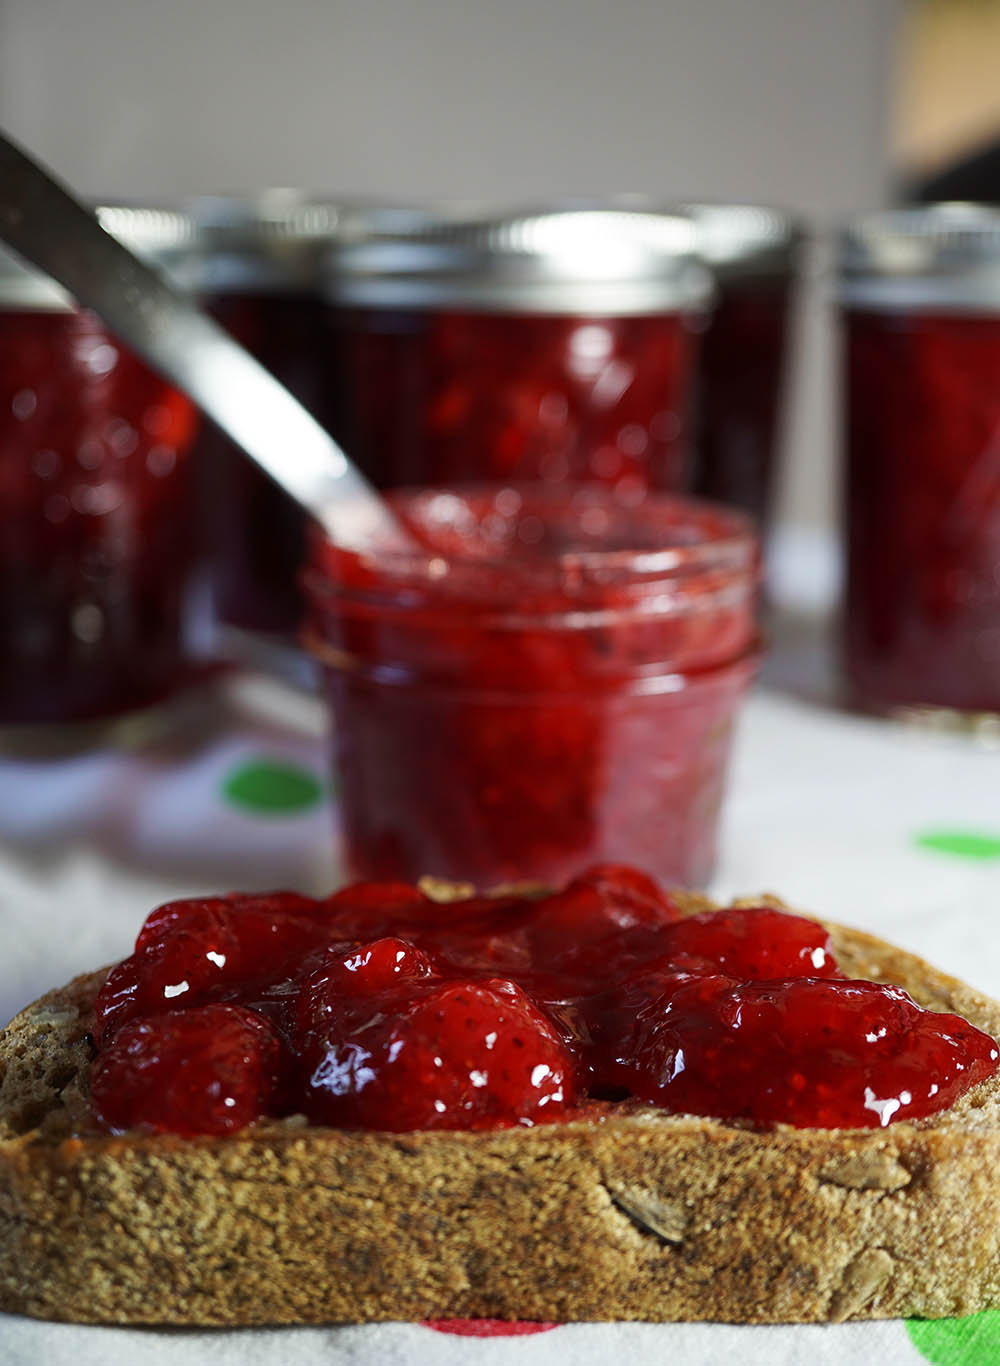 Not much better than toast with Strawberry jam!